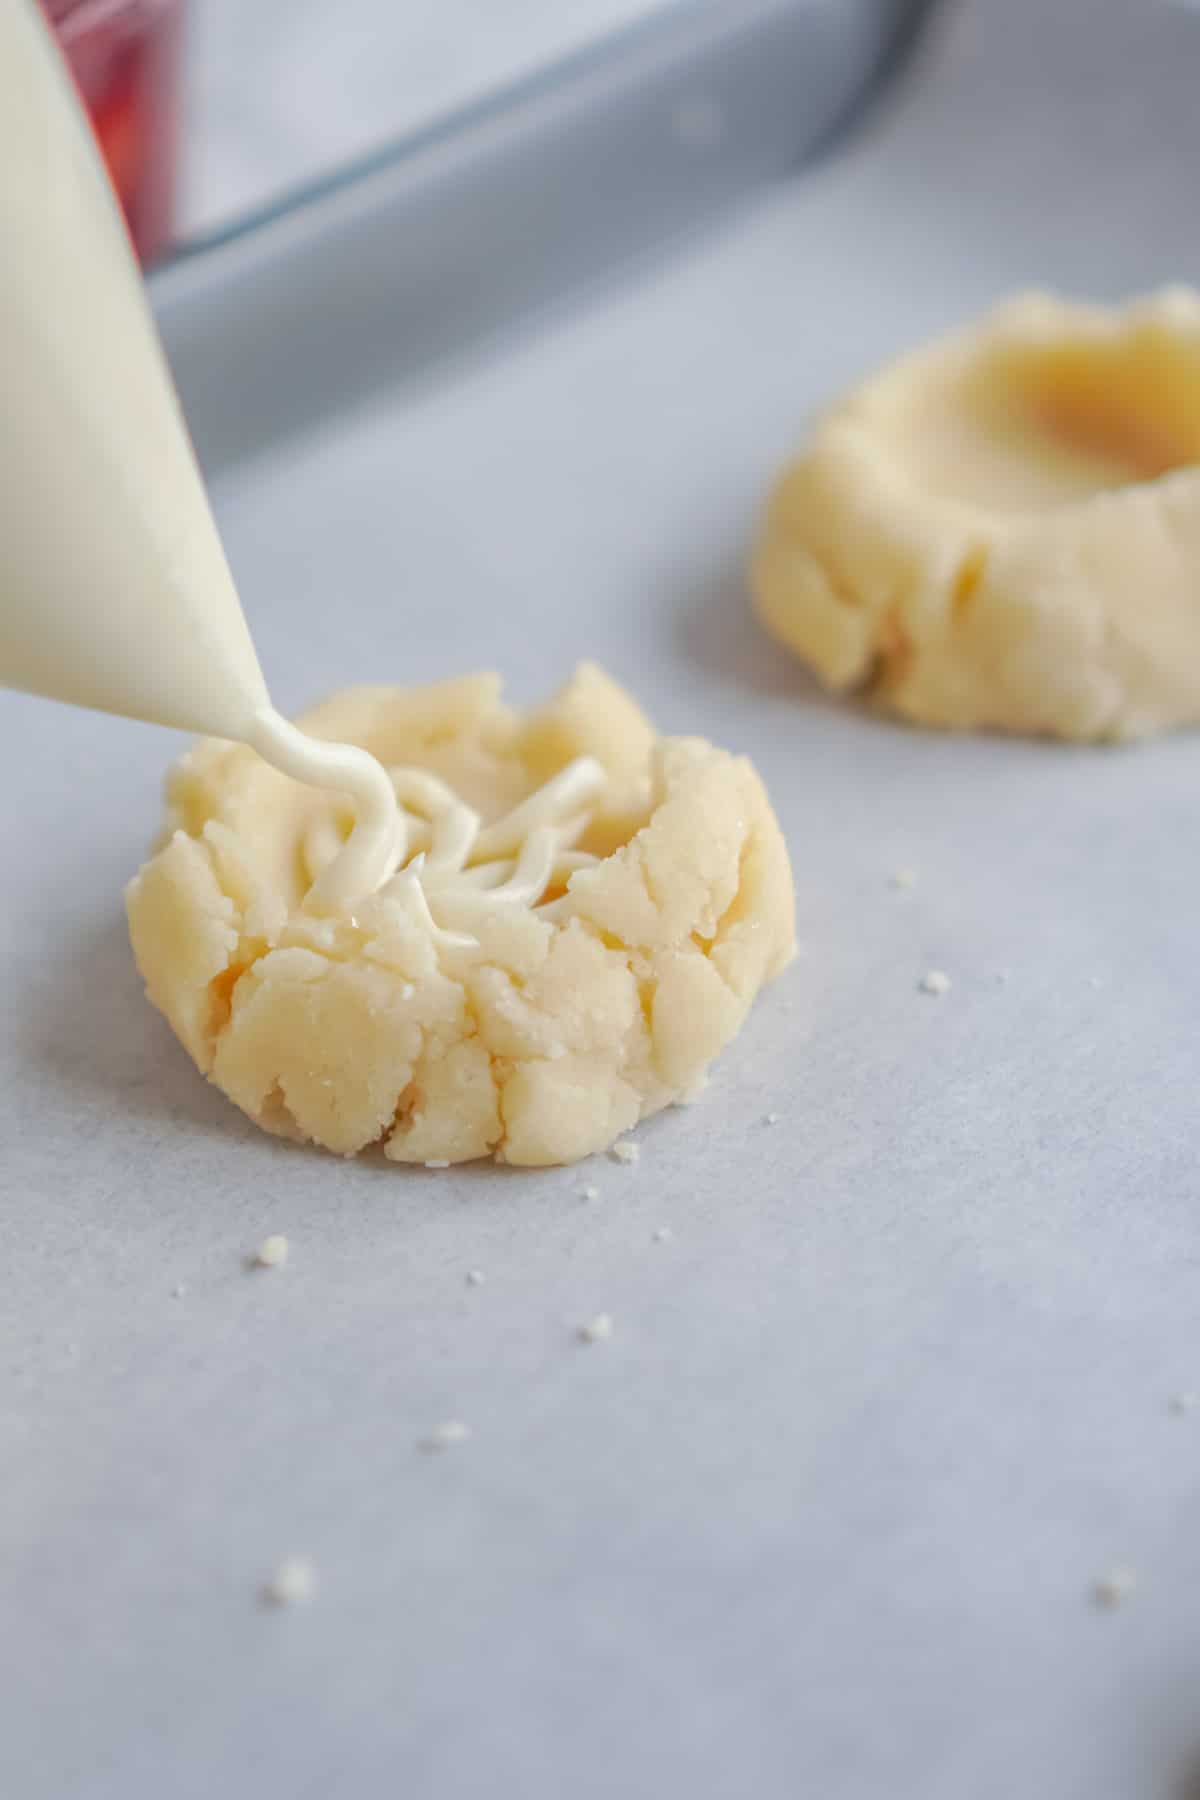 Cheesecake filling being piped onto a sugar cookie